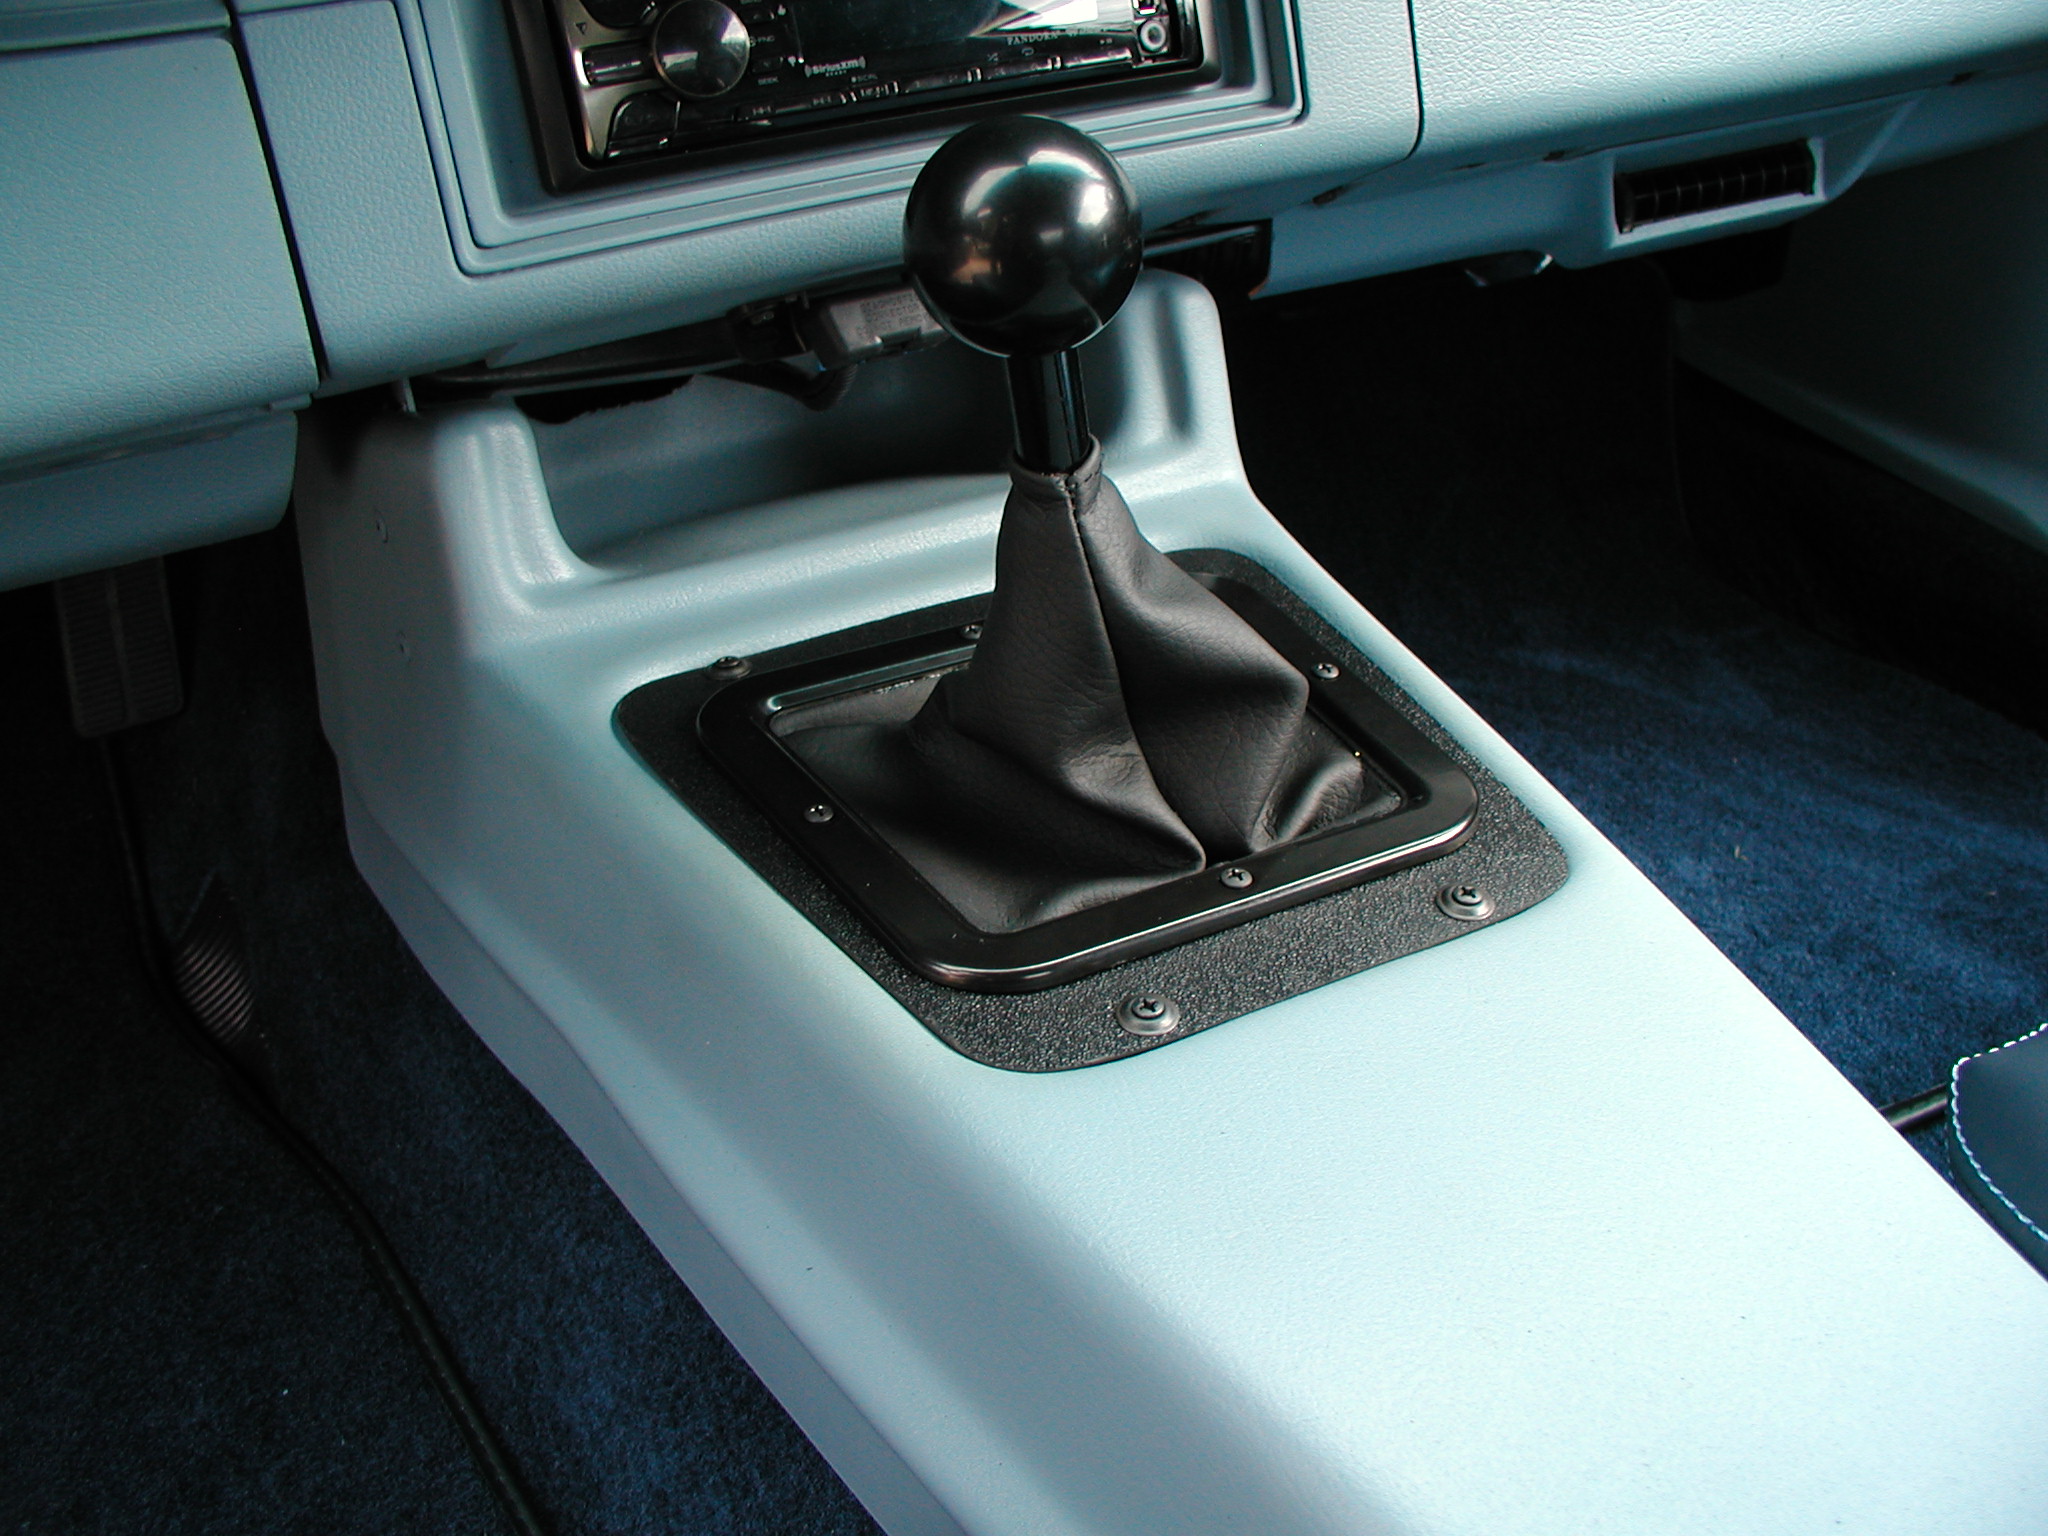 shifter-build-and-install-4-23-and-4-24-18-jpg.68452